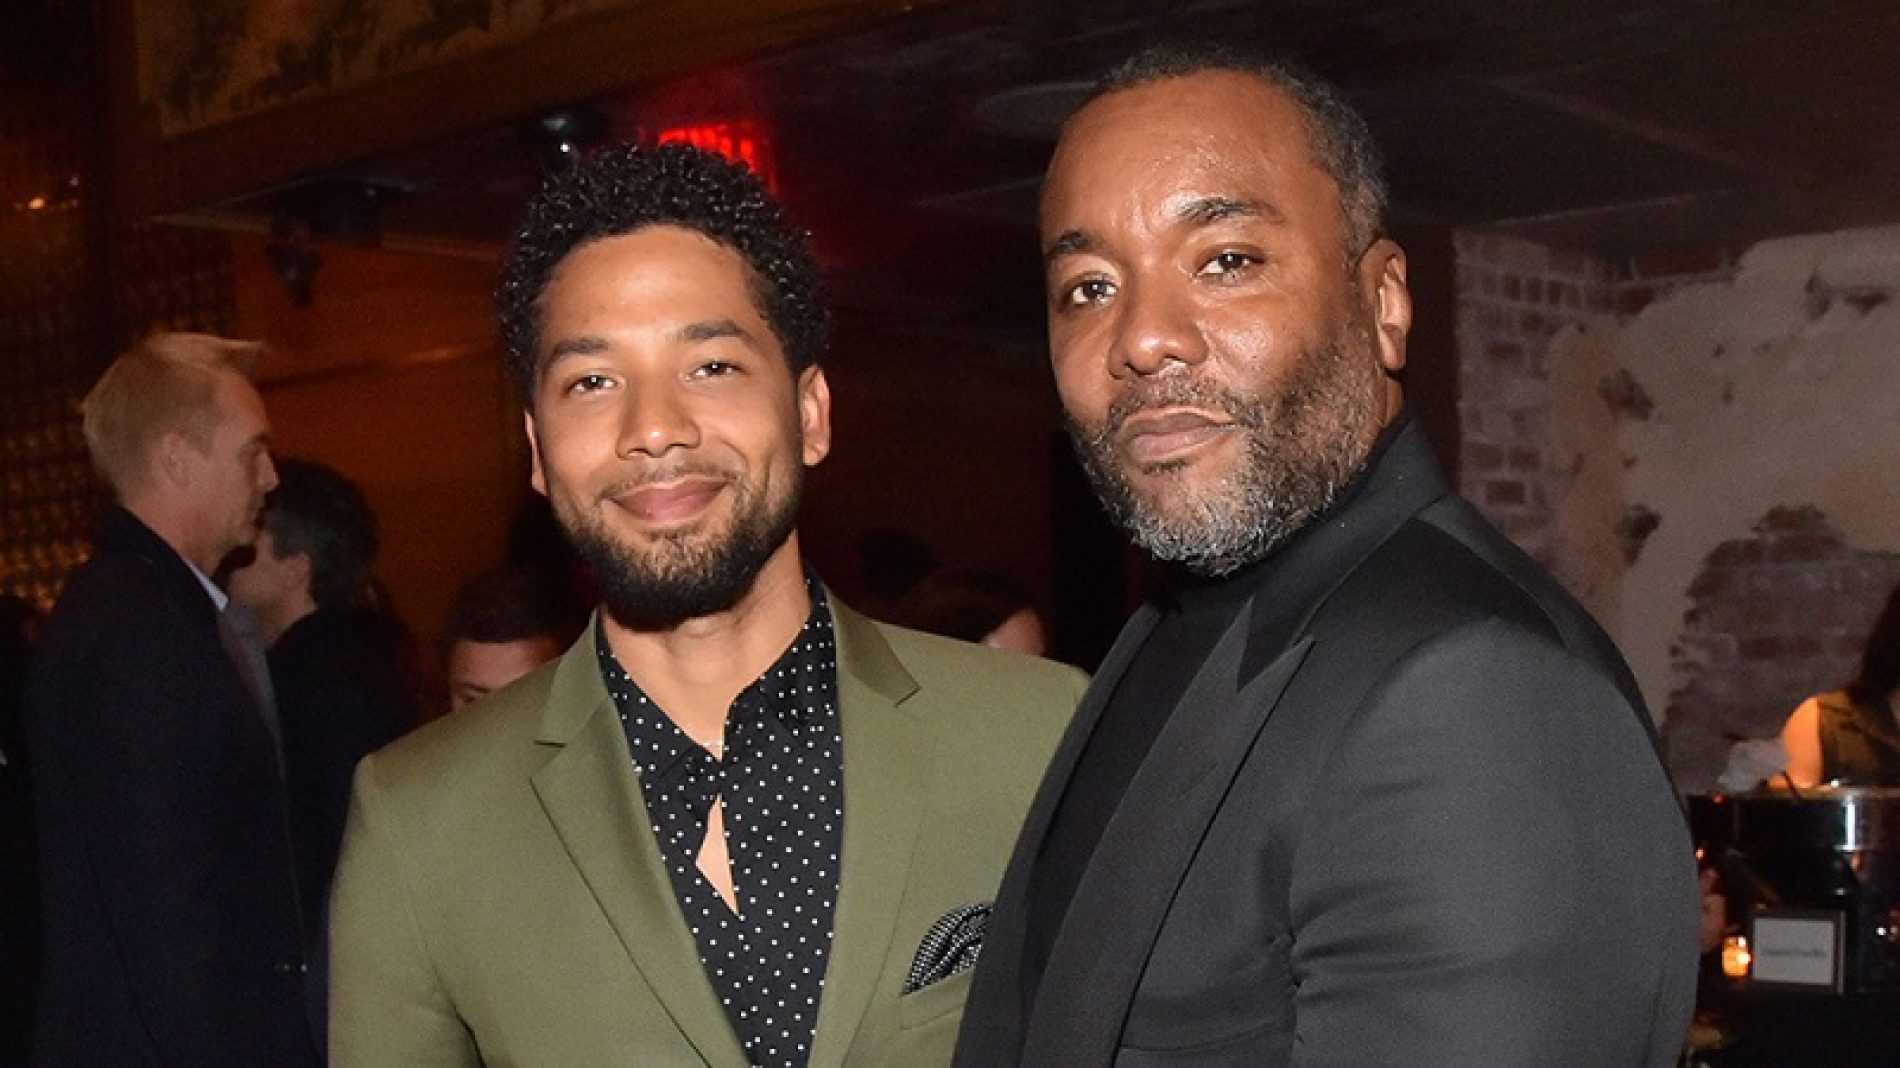 “I’m Beyond Embarrassed.” Lee Daniels reveals of himself on the subject of Jussie Smollett’s assault case